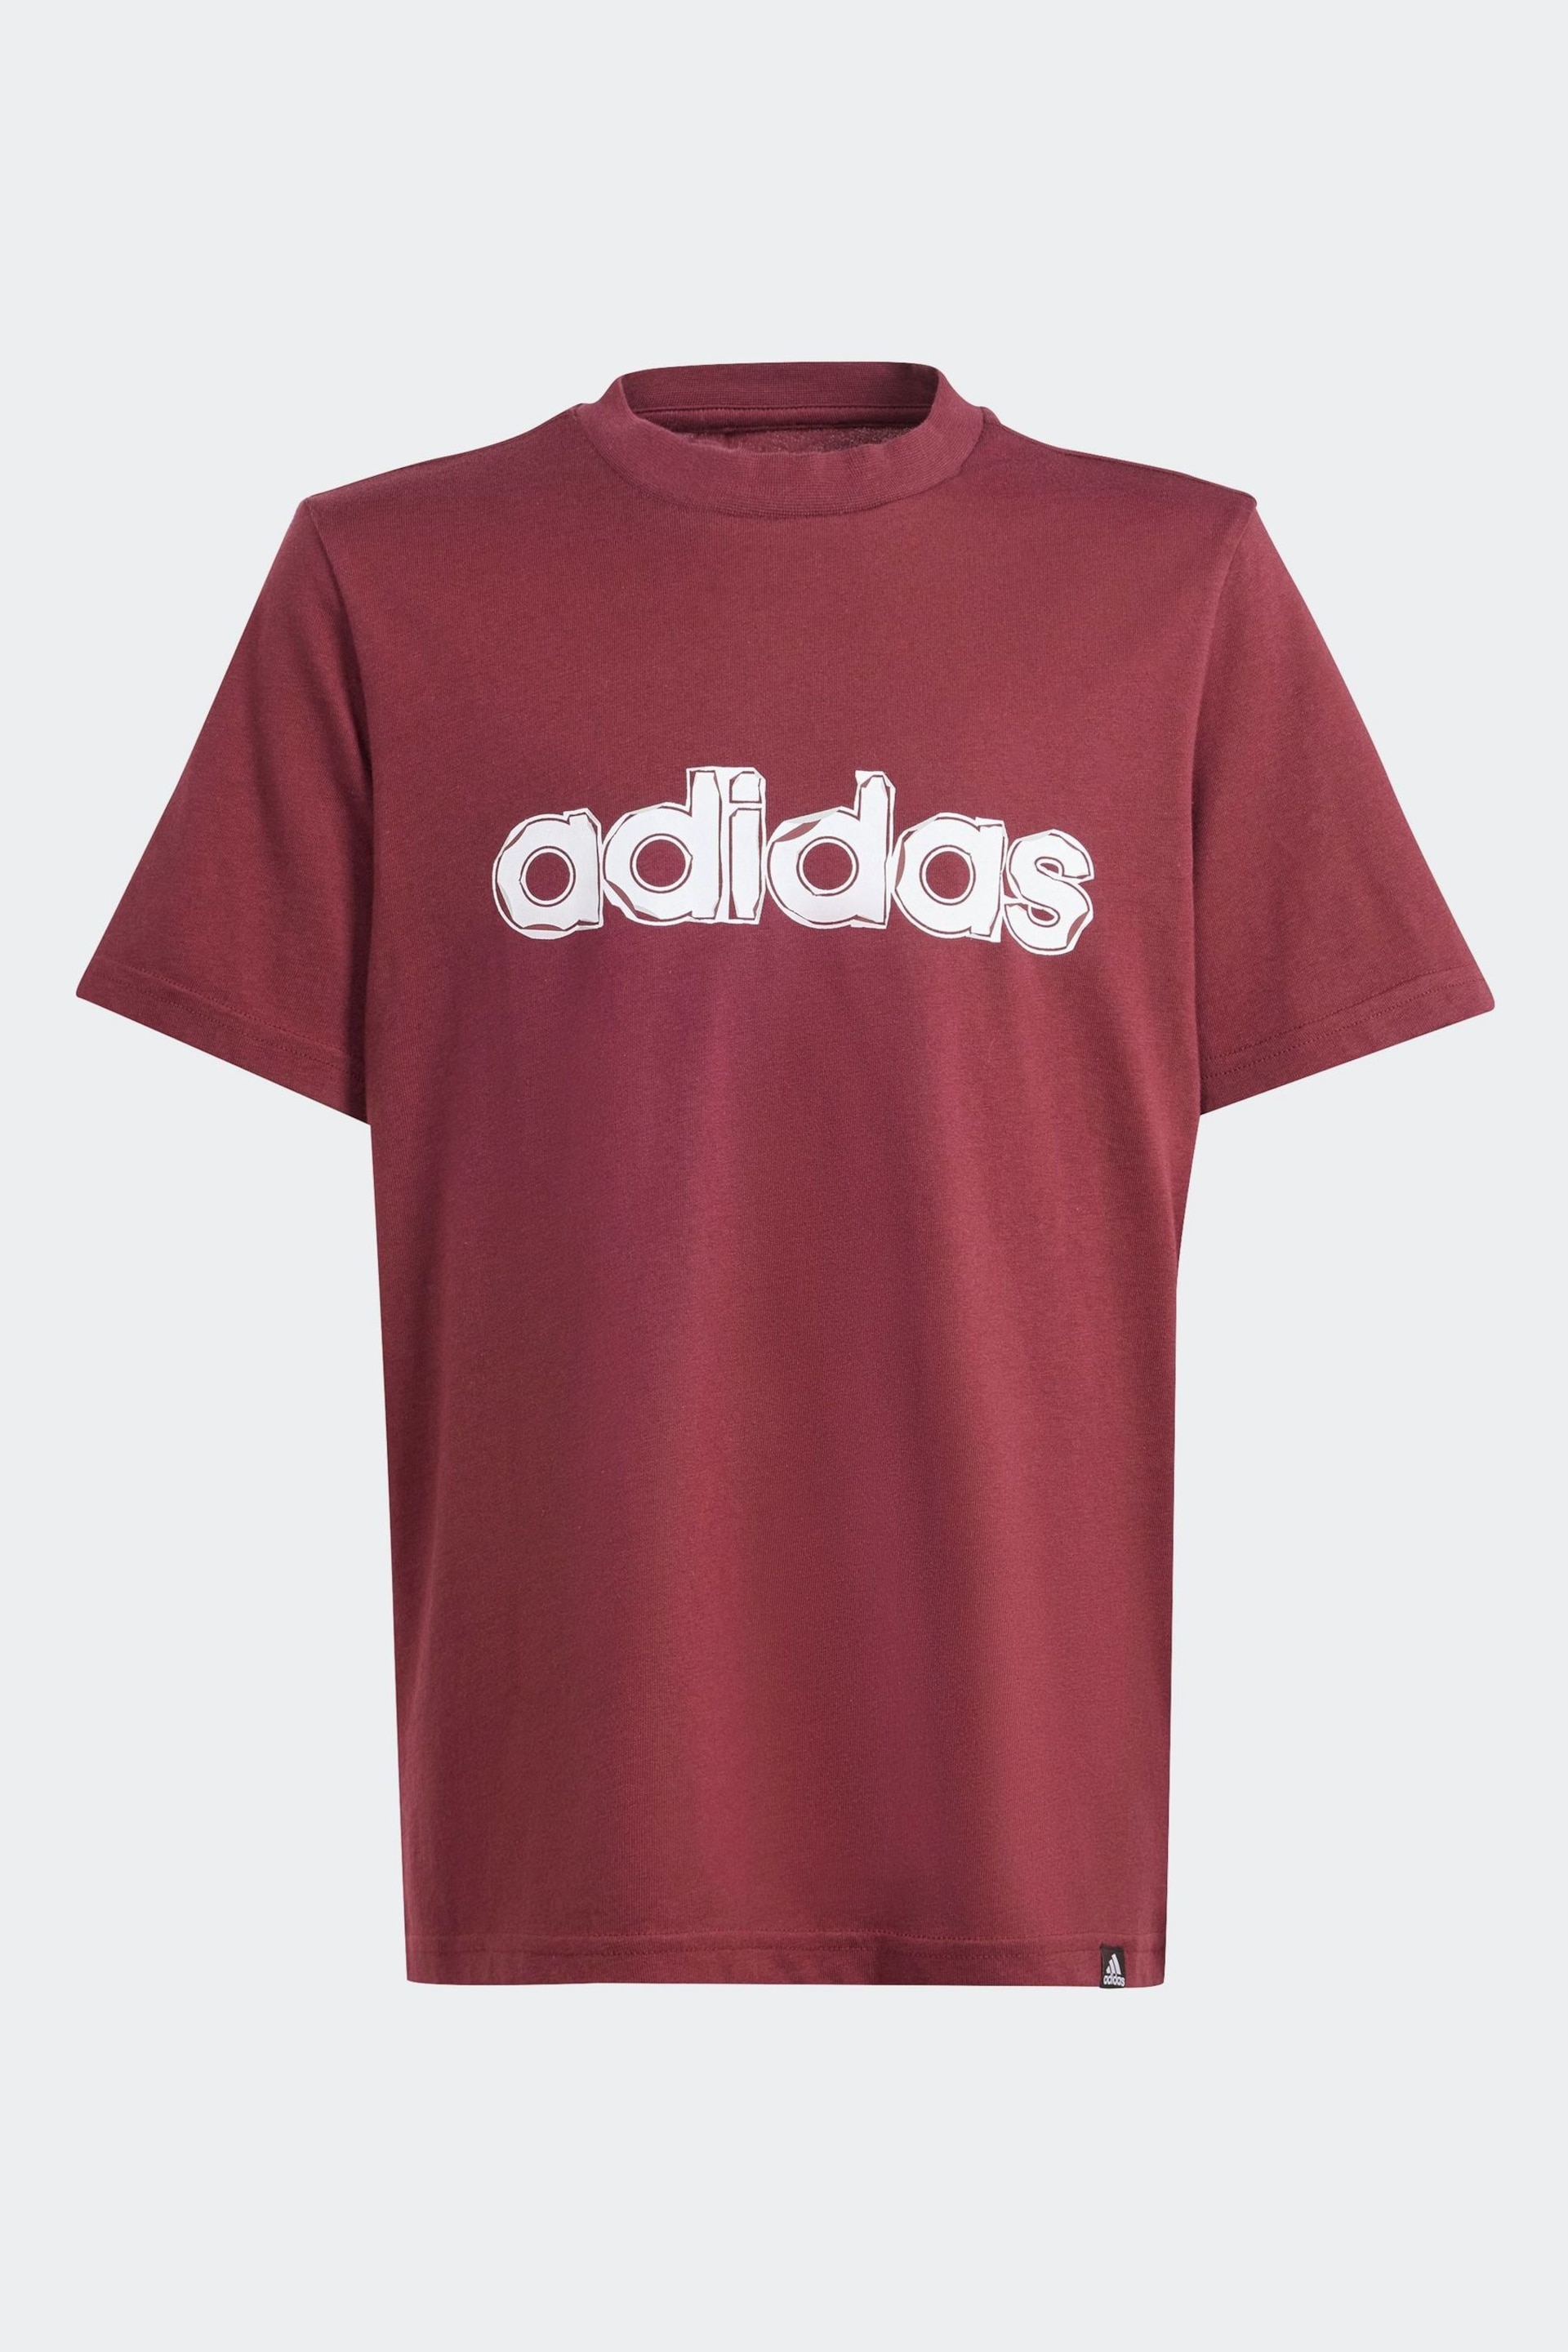 adidas Berry Red Sportswear Table Growth Graphic T-Shirt - Image 1 of 6